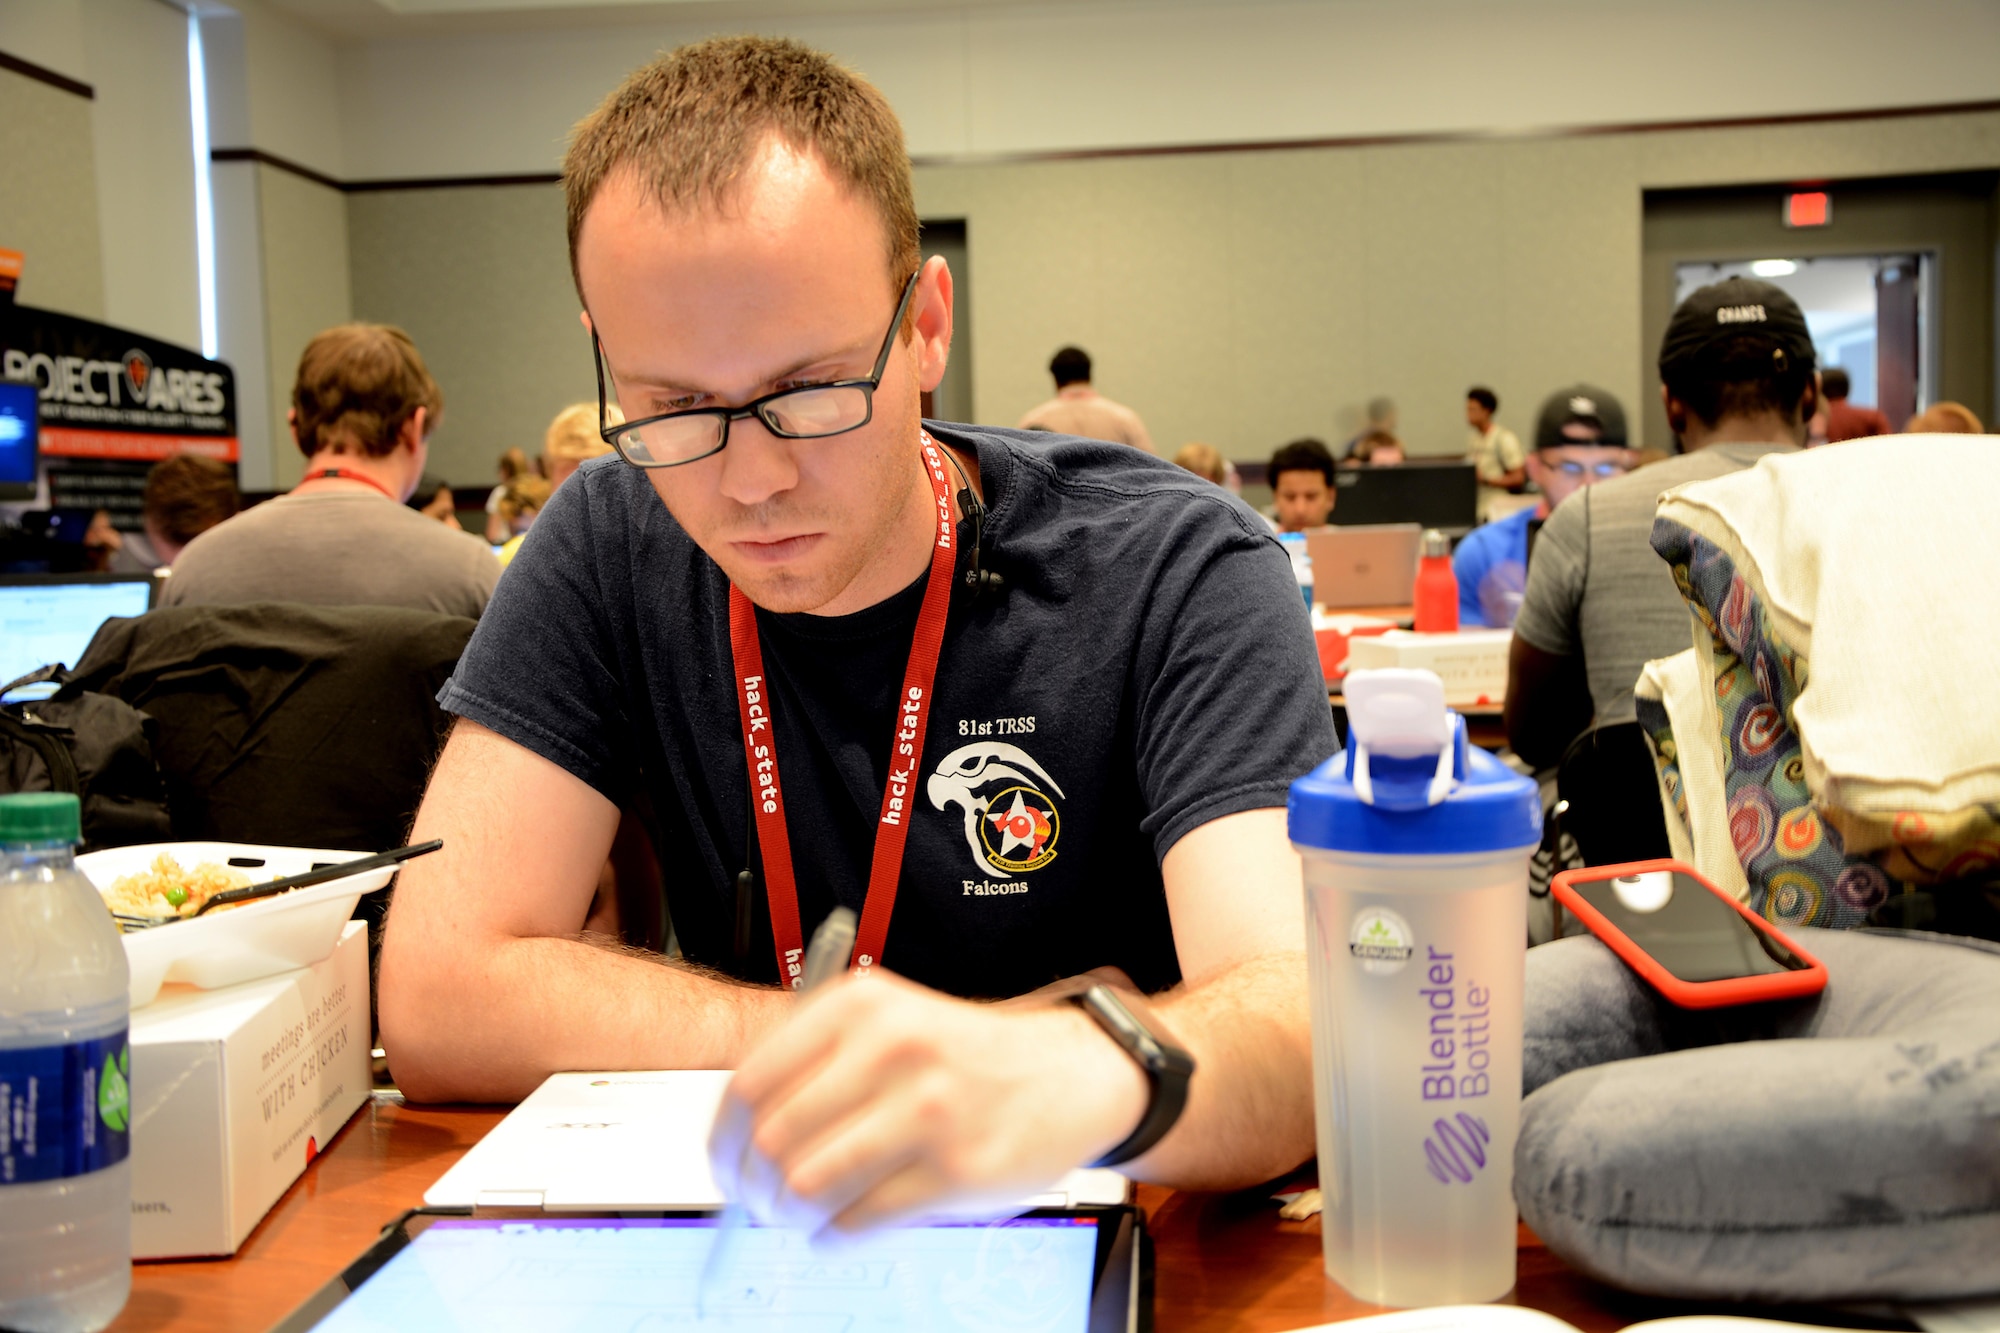 Staff Sgt. Christopher Pineda, 81st Training Support Squadron interactive media developer, programs a safety hack Sept. 23, 2017, during HackState at Mississippi State University in Starkville, Mississippi. The Keesler team participated in a hackathon and won the best safety hack, which was created in 24 hours, for Industrial Paper. (Courtesy photo)